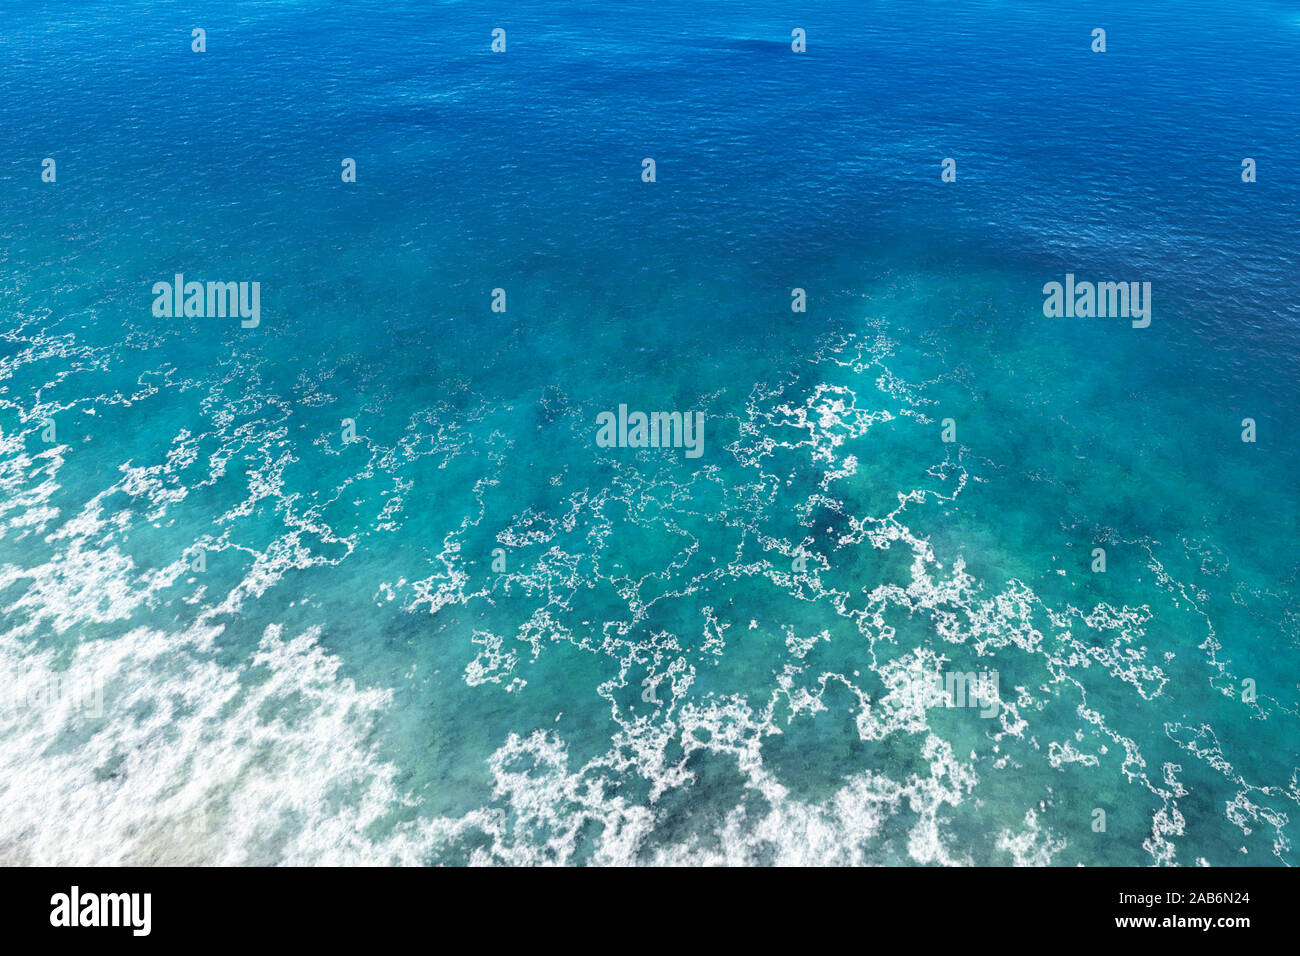 An illustration of a blue water scape shore Stock Photo